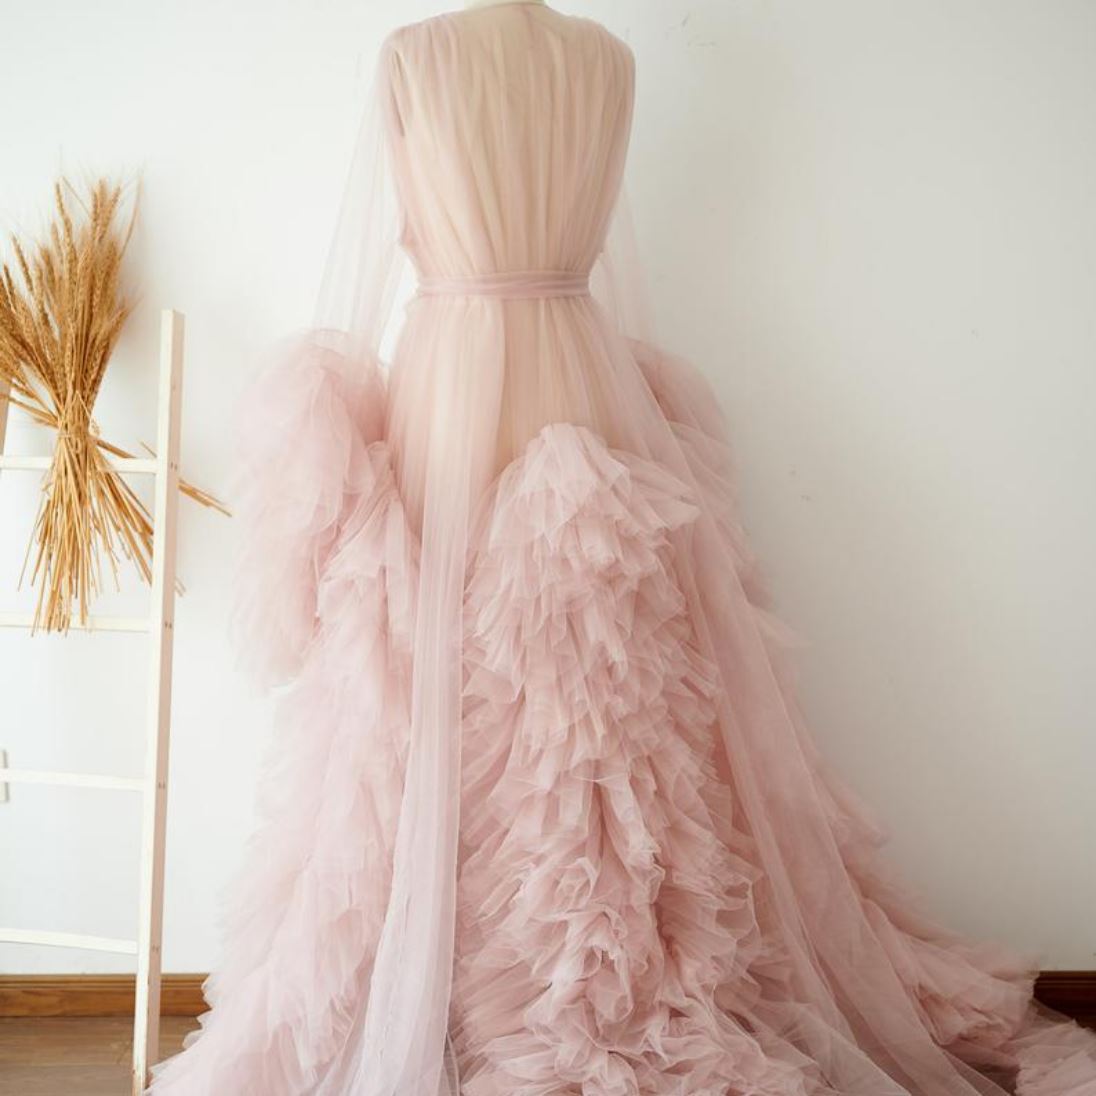 Pink Tulle Gown Kimono Photo Shoot Props Wedding Accessories BlissGown 